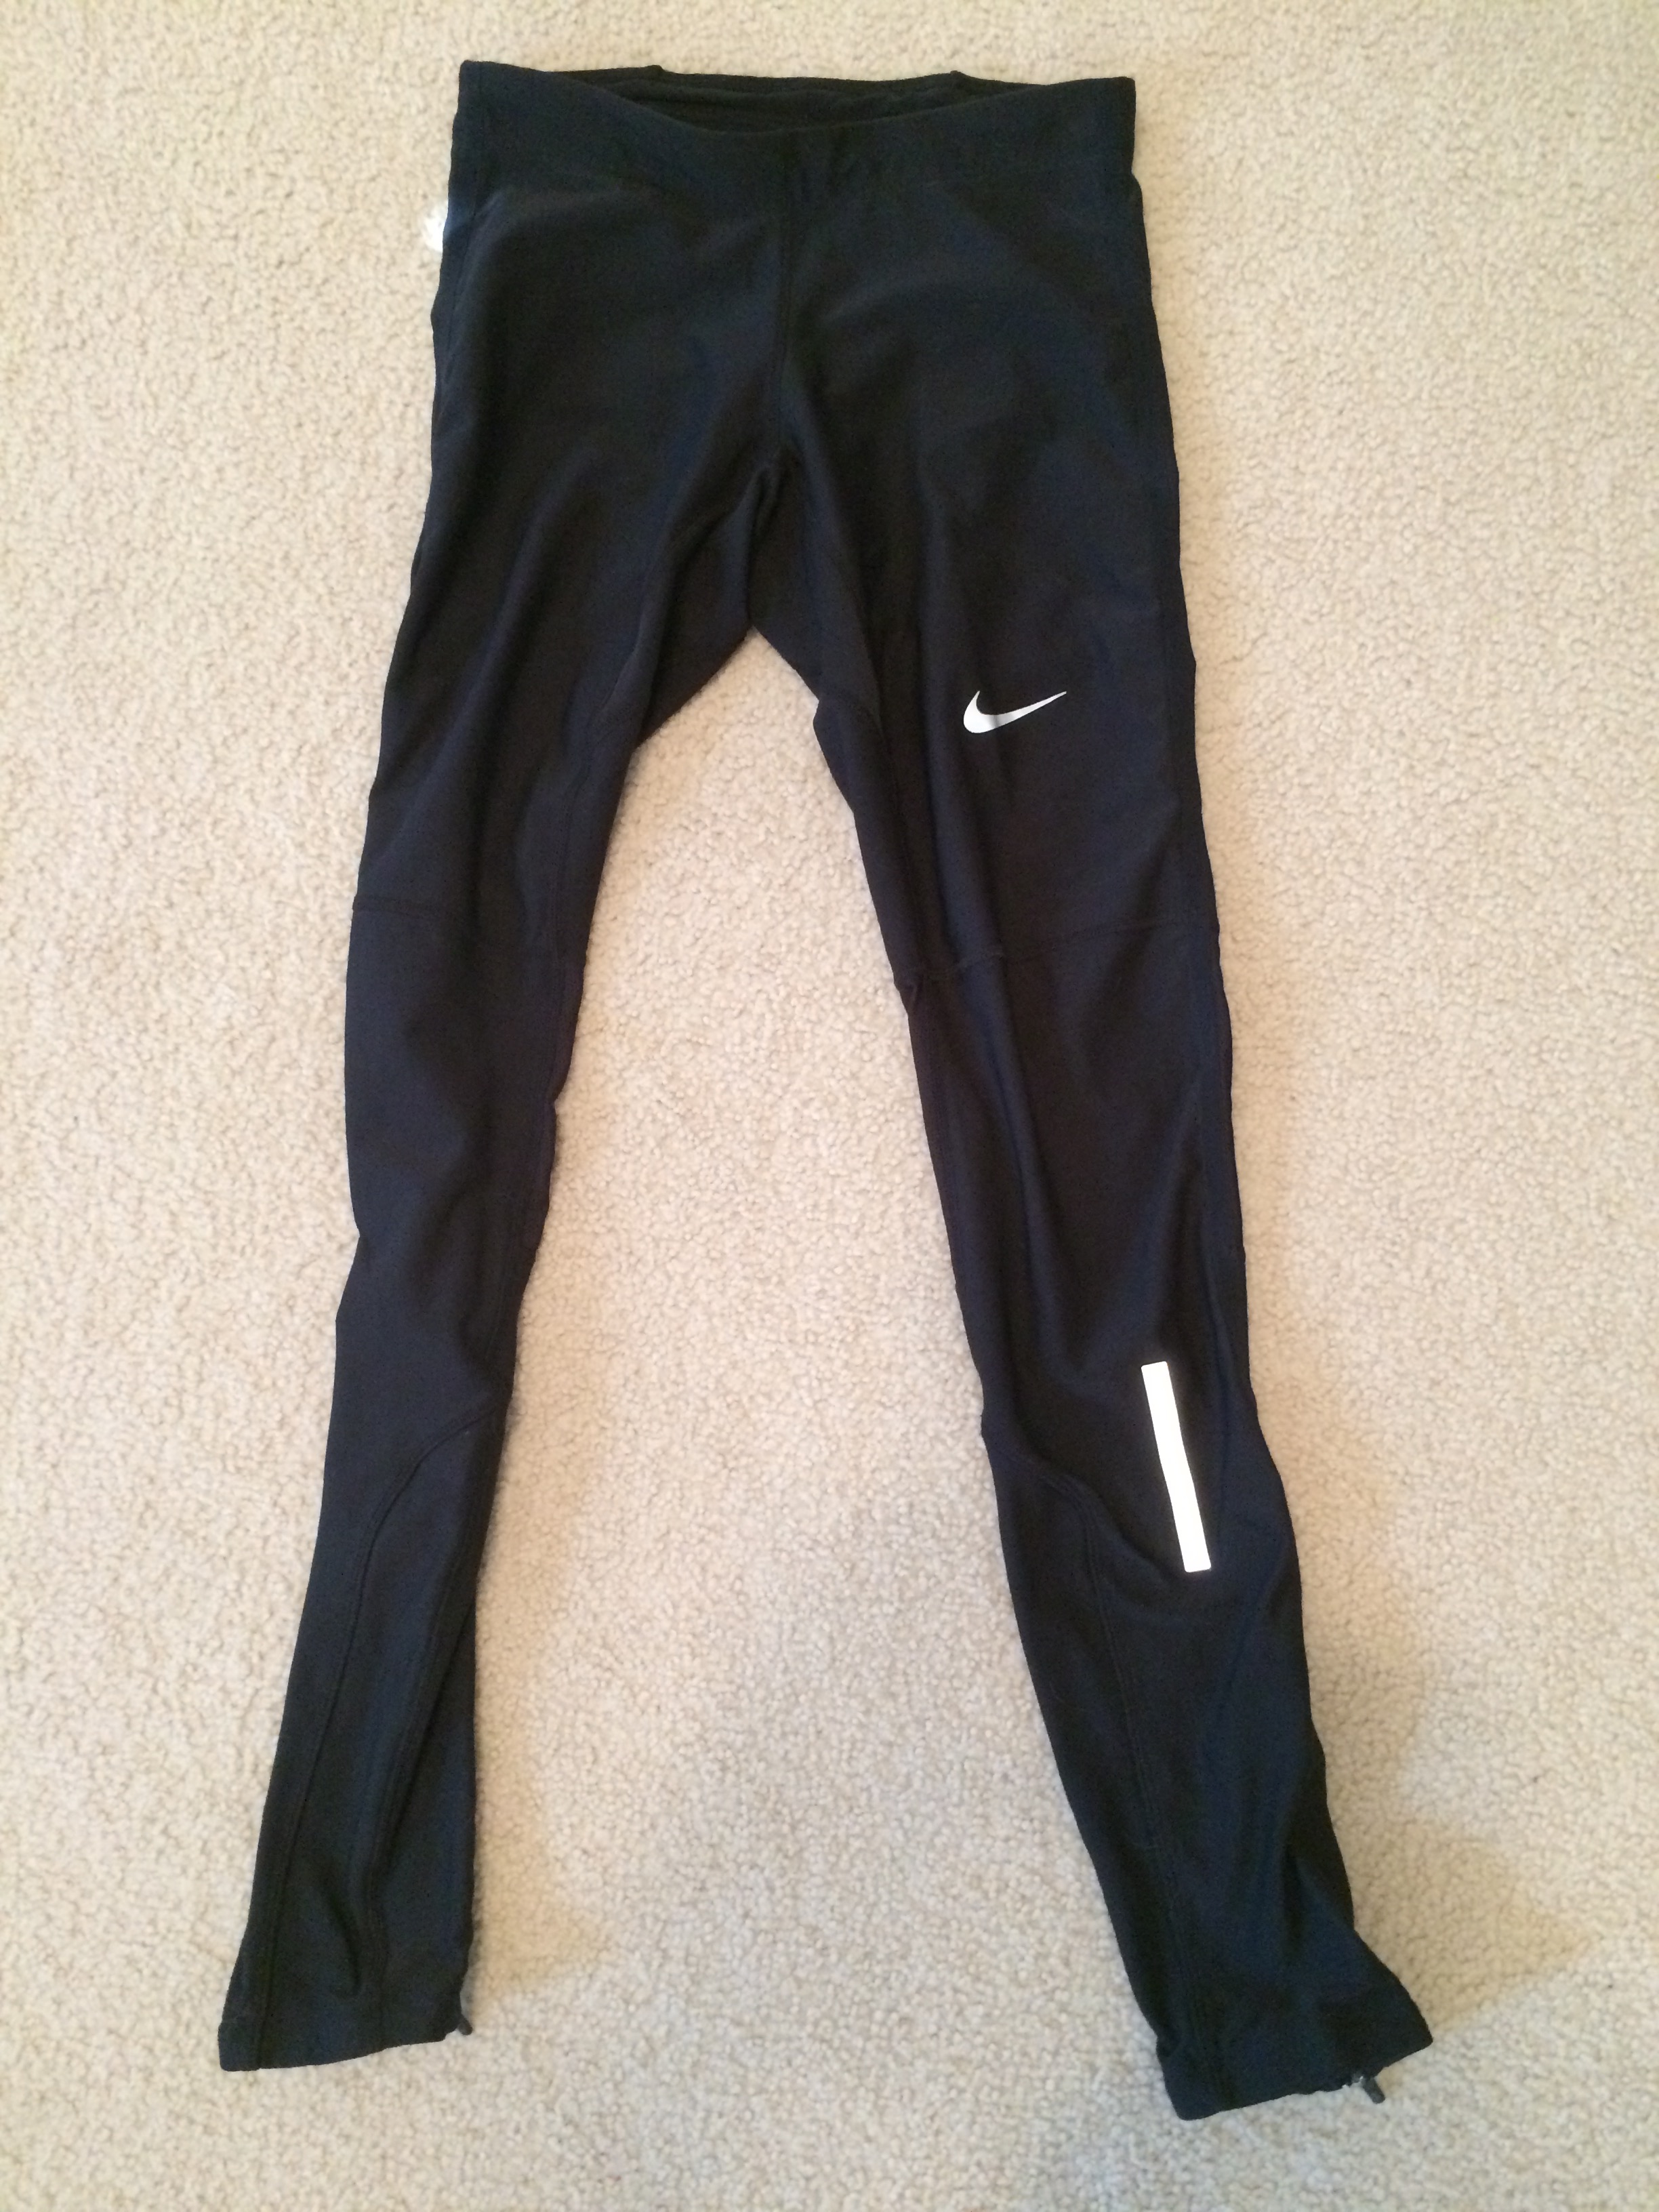 Which compression pants are the best? | Marathon Training Academy